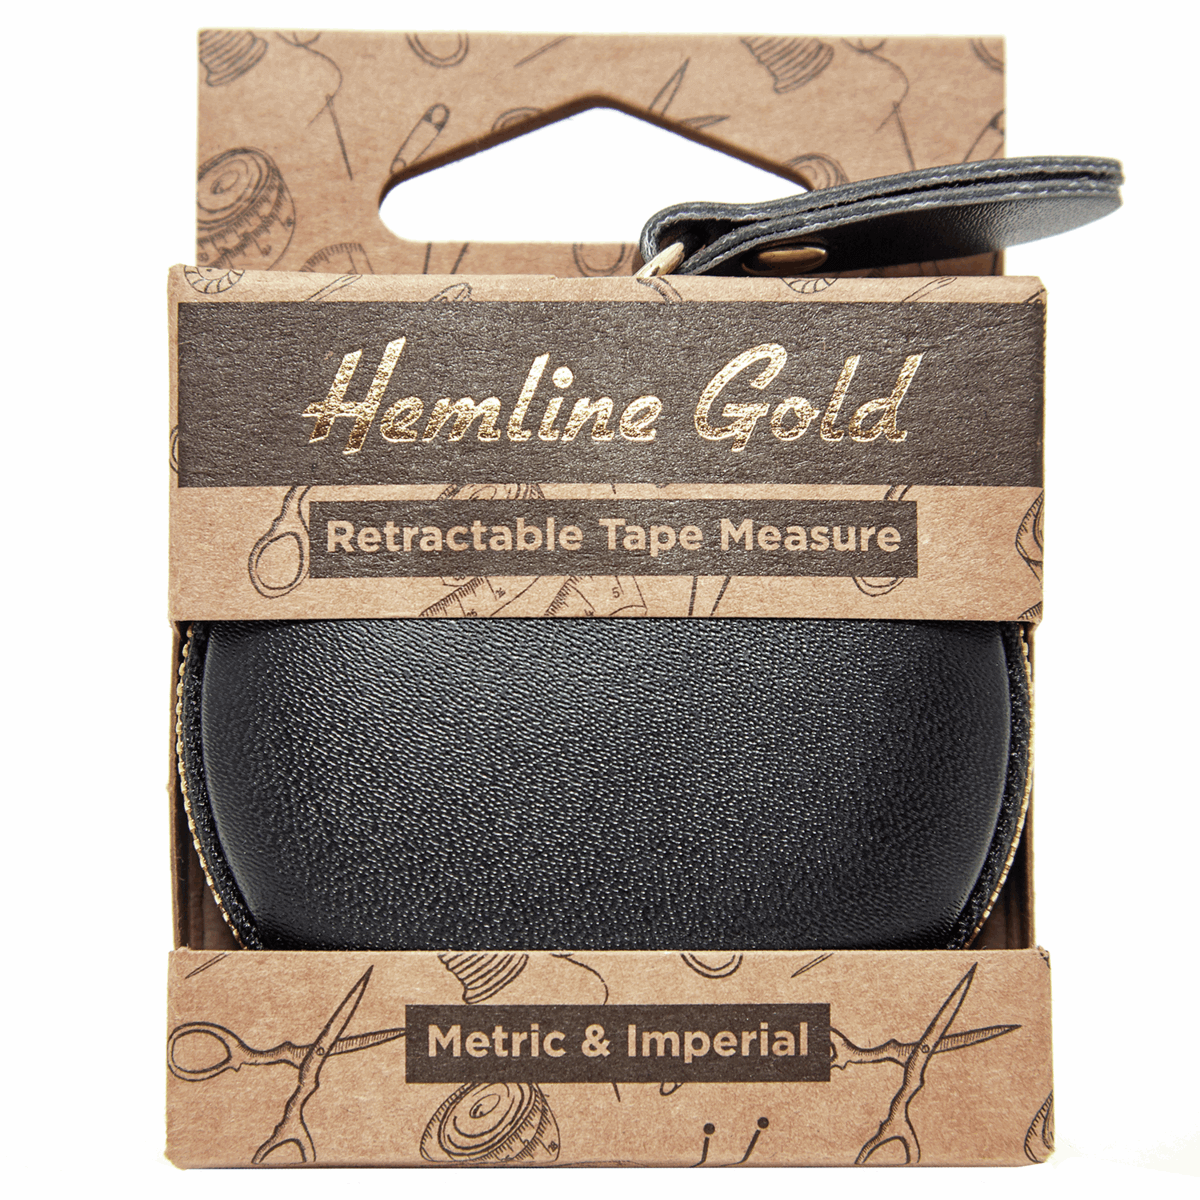 Deluxe Retractable Tape Measure. Sewing and crafts. 60 in/150 cm. Hemline Gold